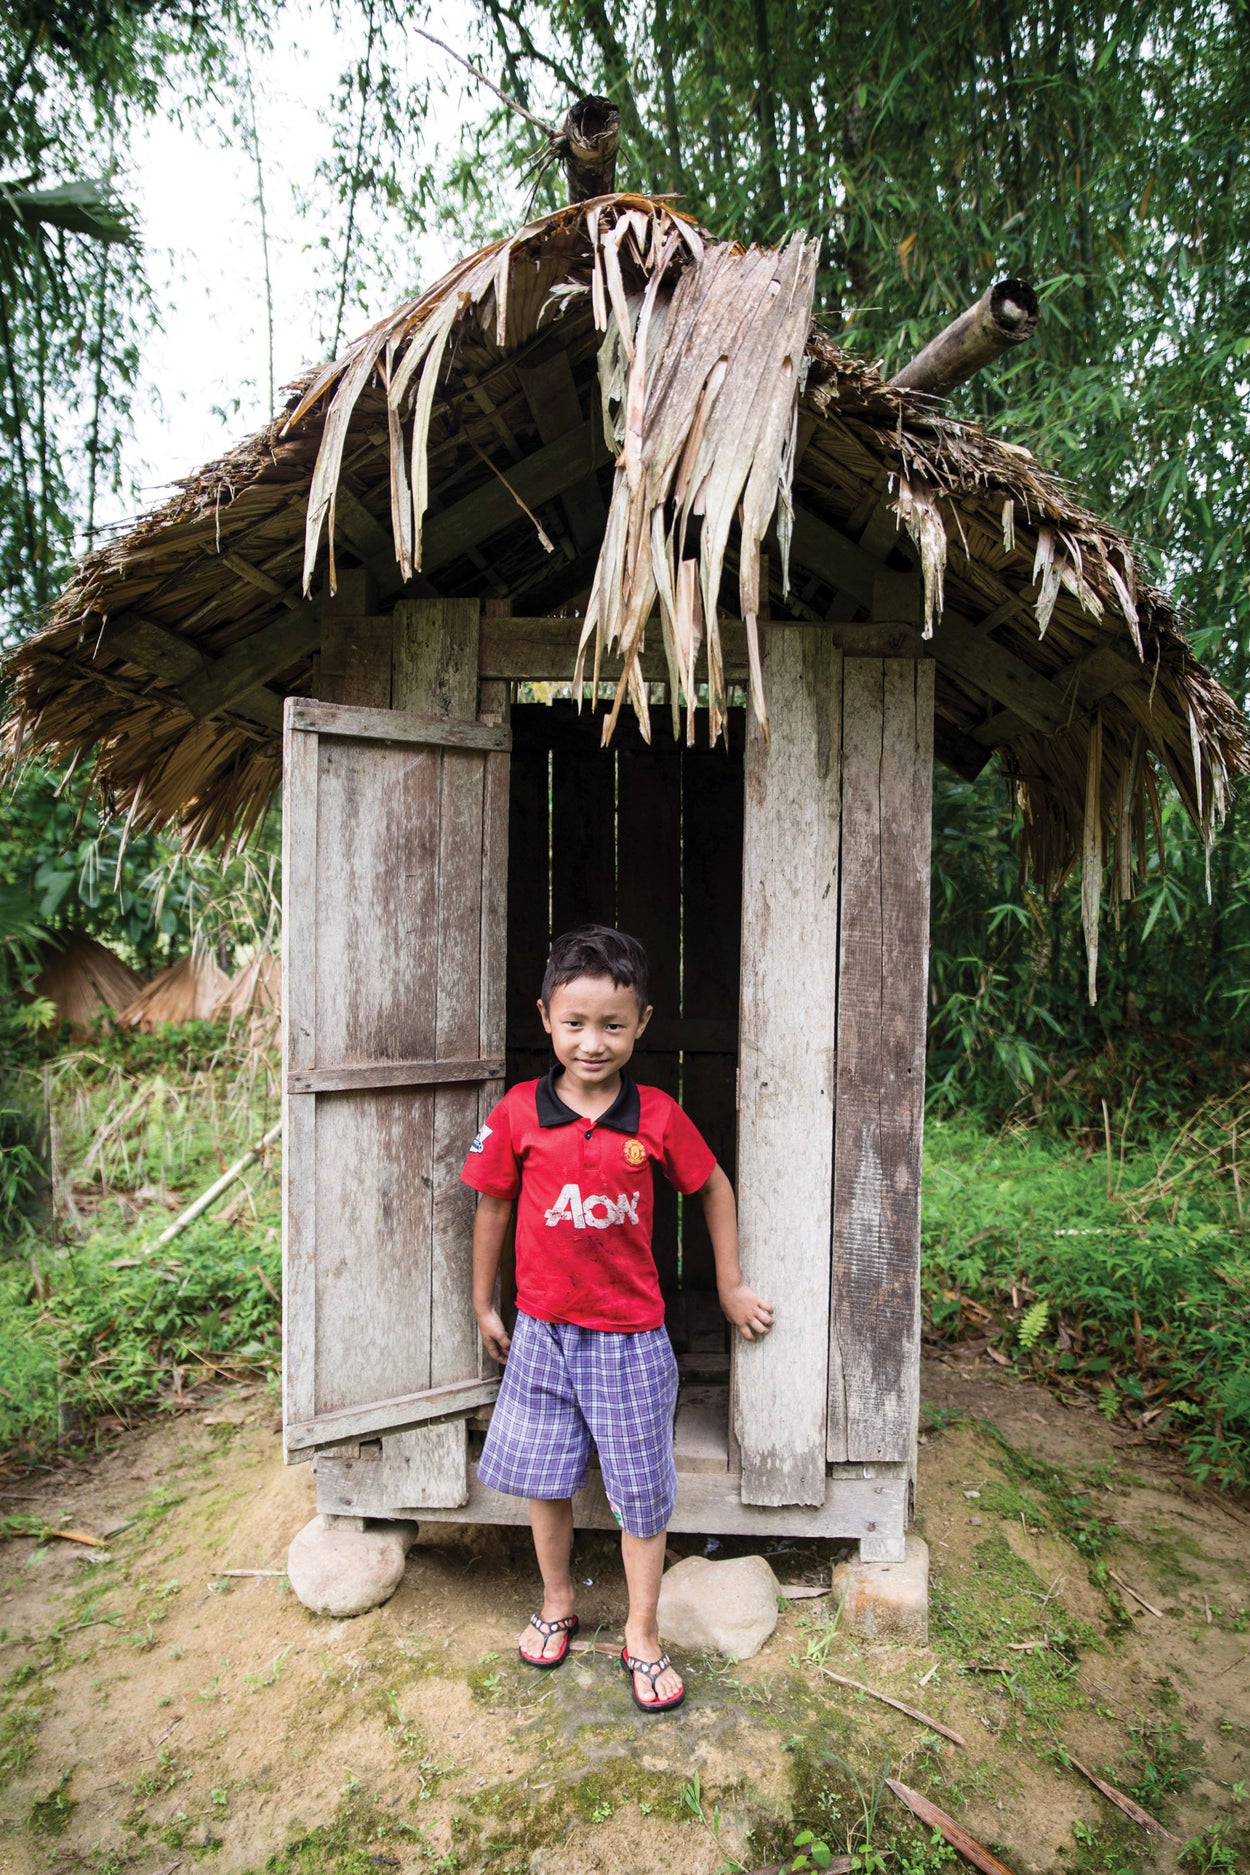 boy in a red shirt standing in front of a latrine